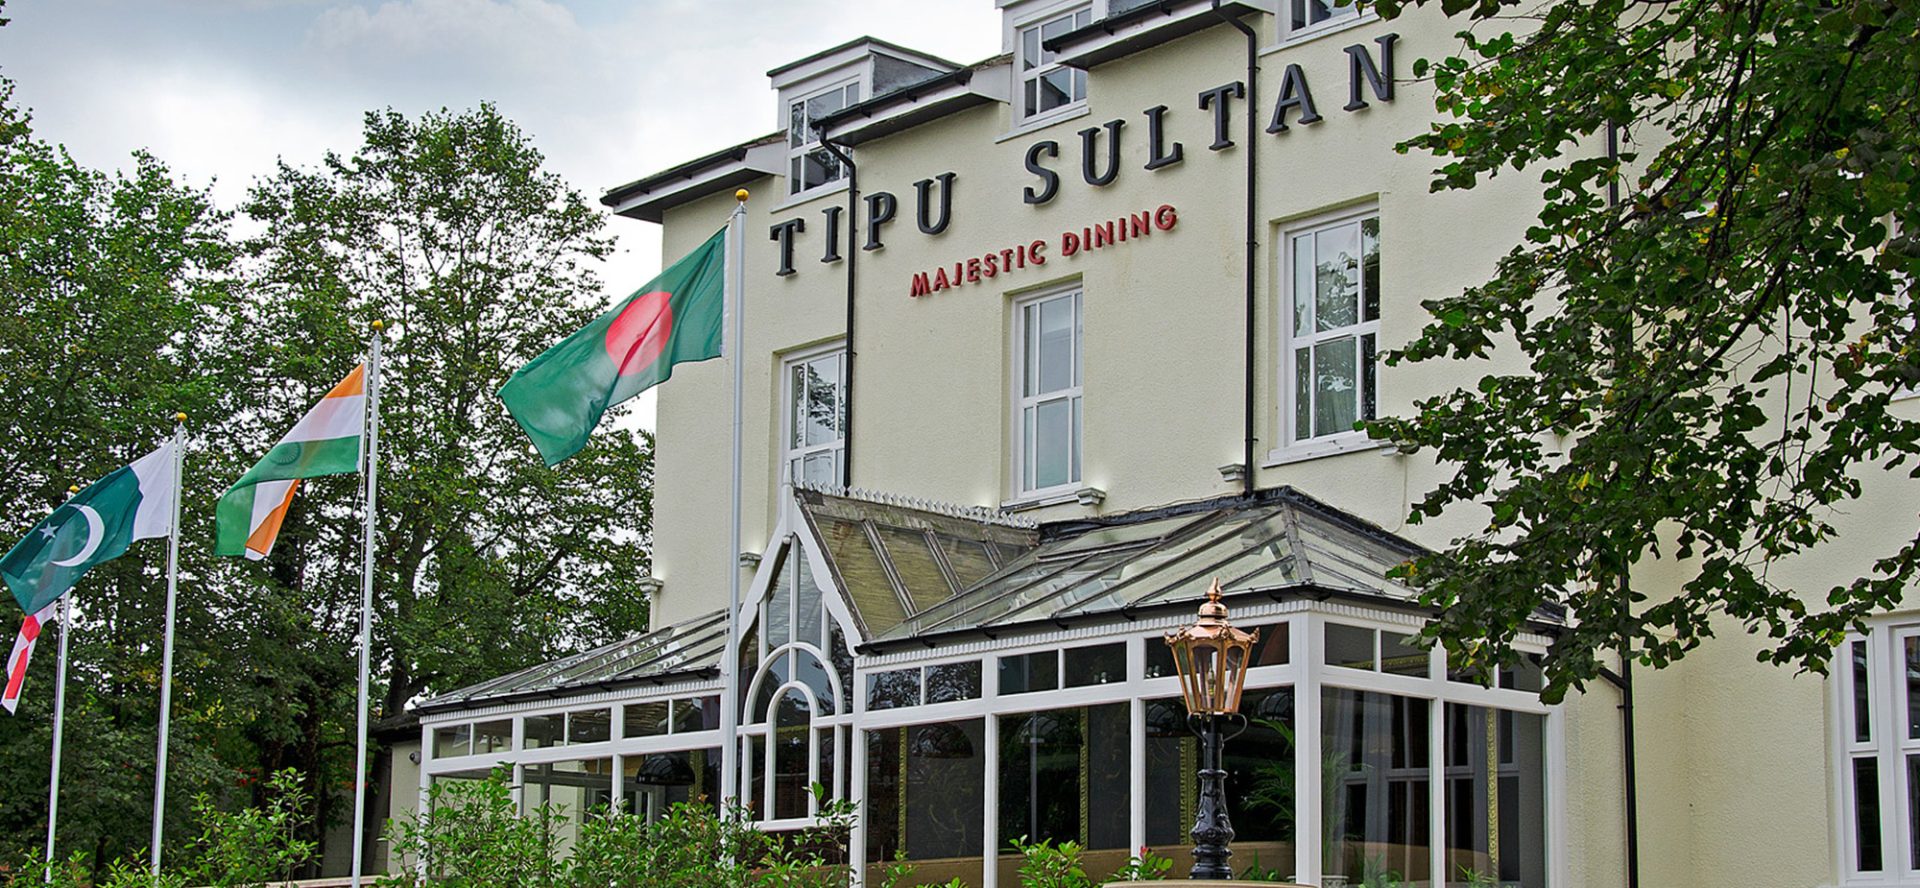 Sunday 7th May 2023 - Tipu Sultan - Birmingham - Aged Event